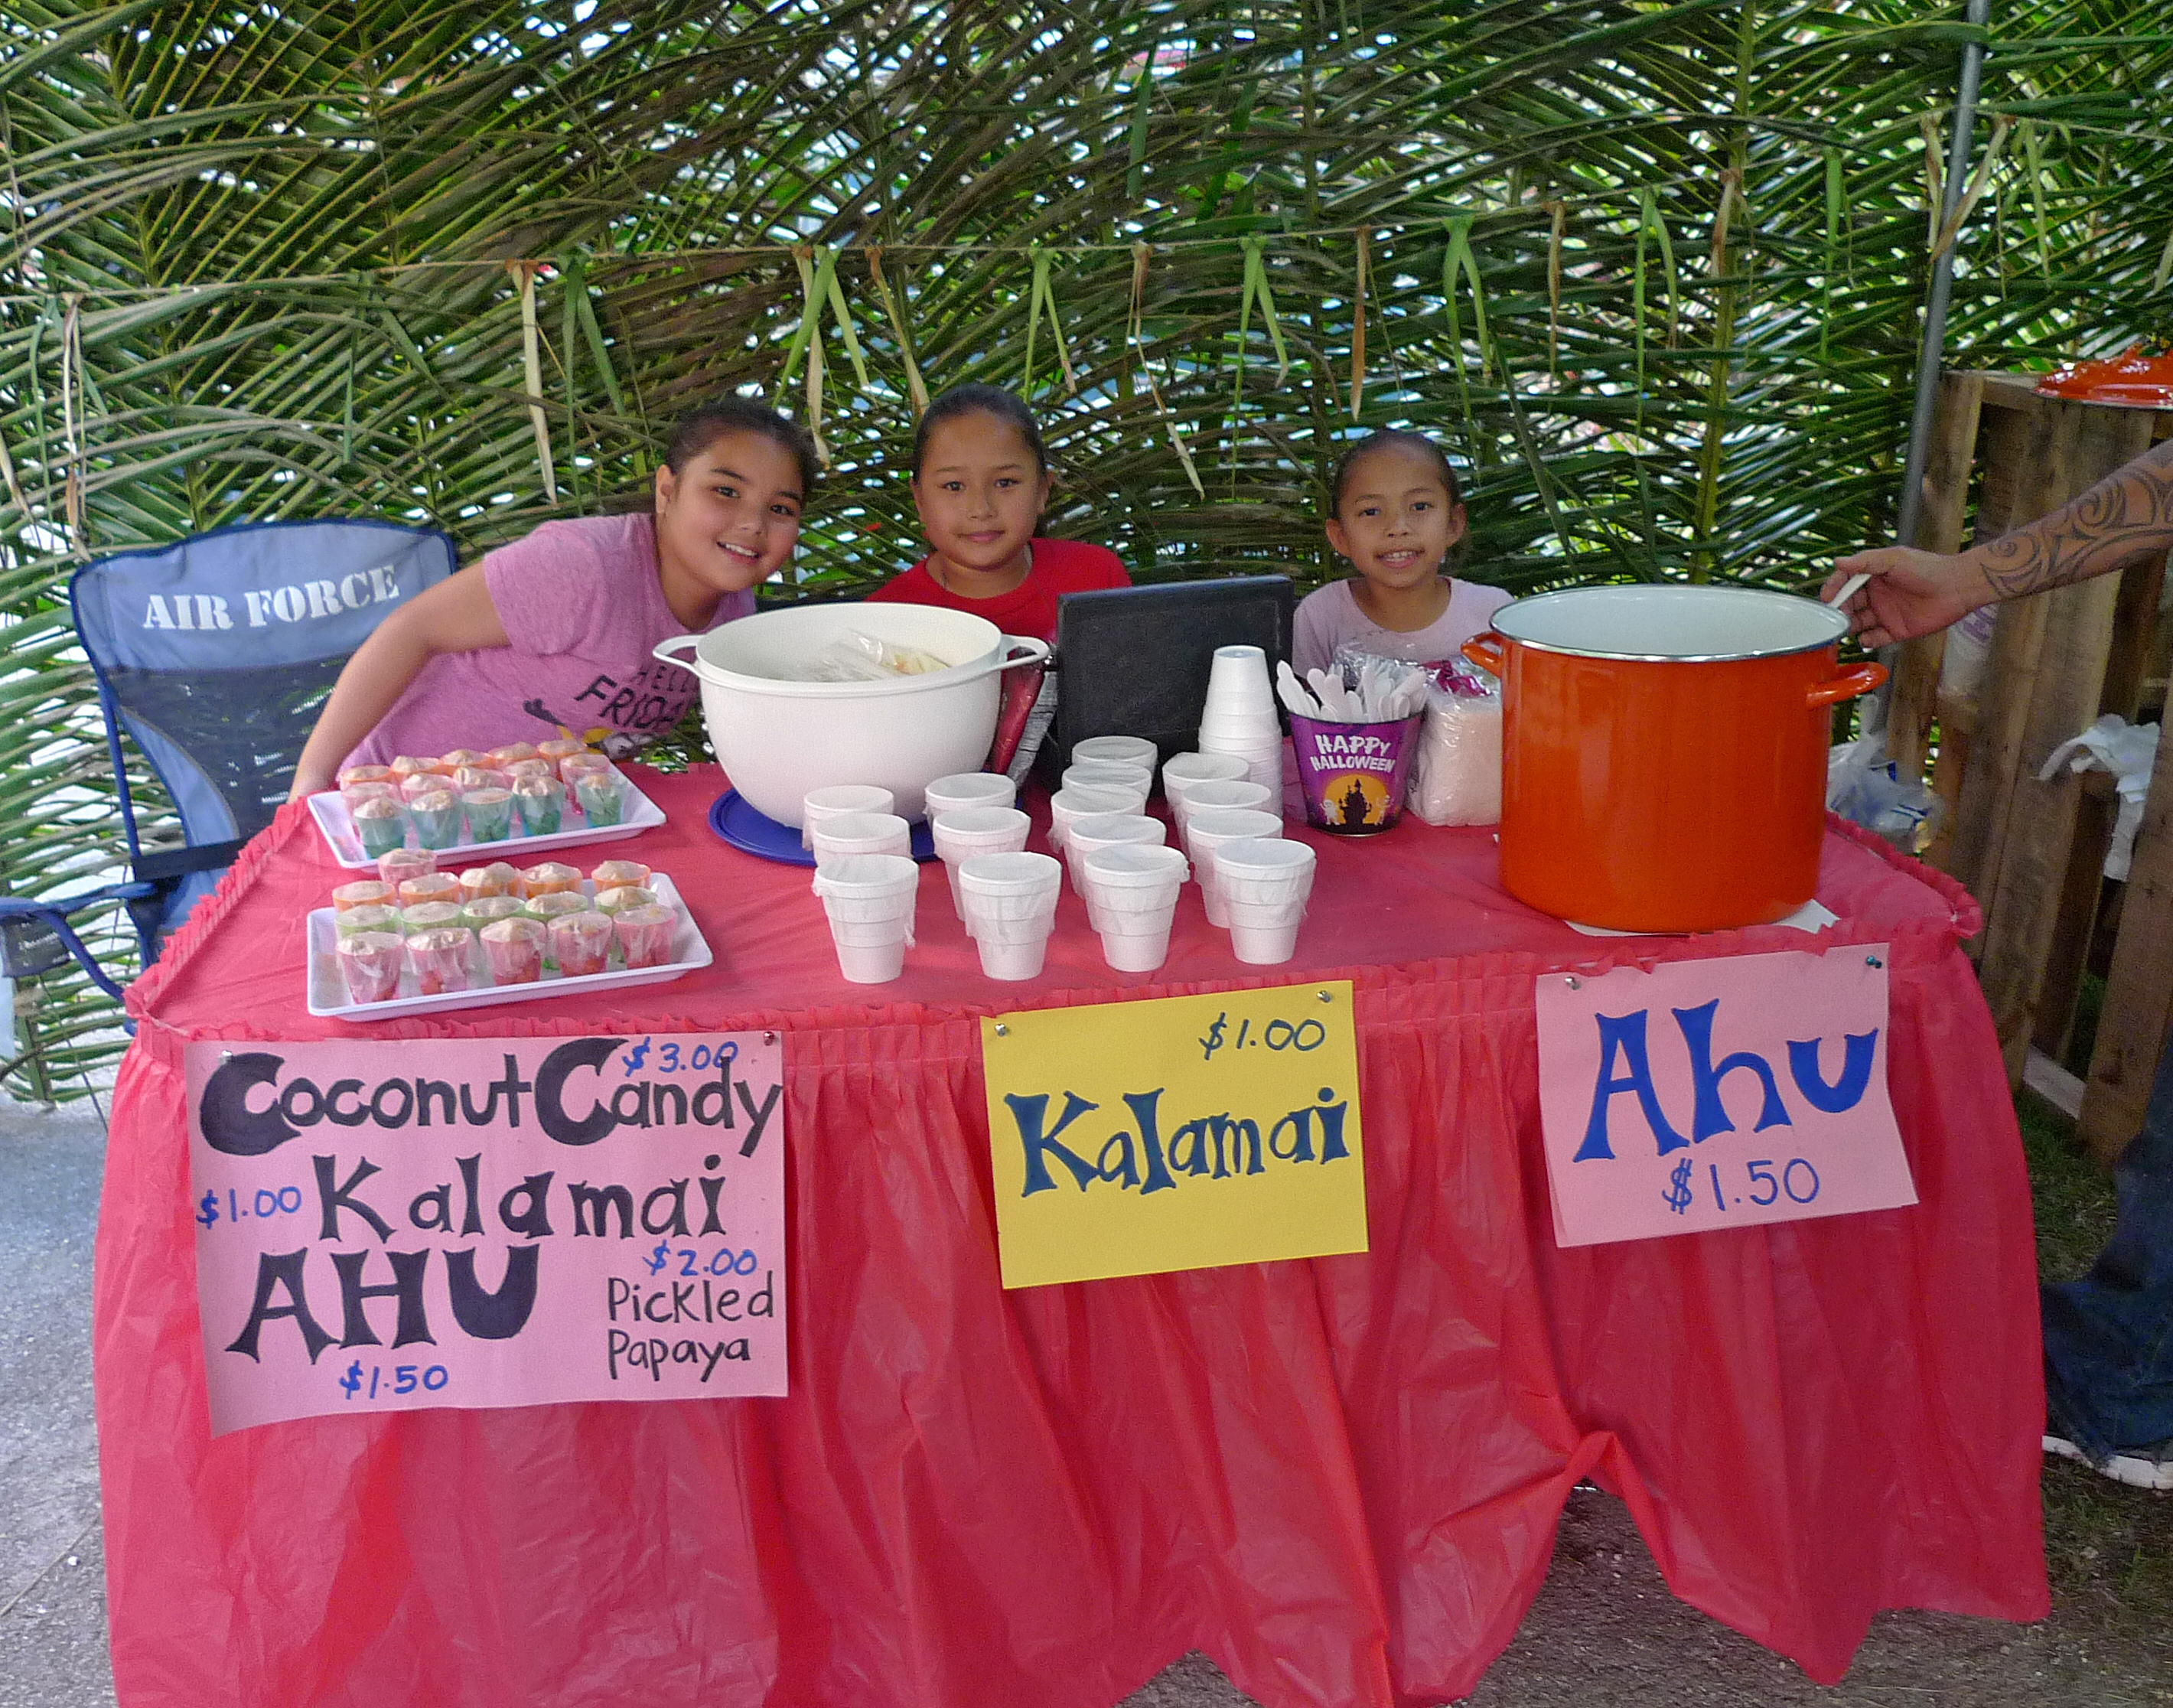 Sample different coconut products